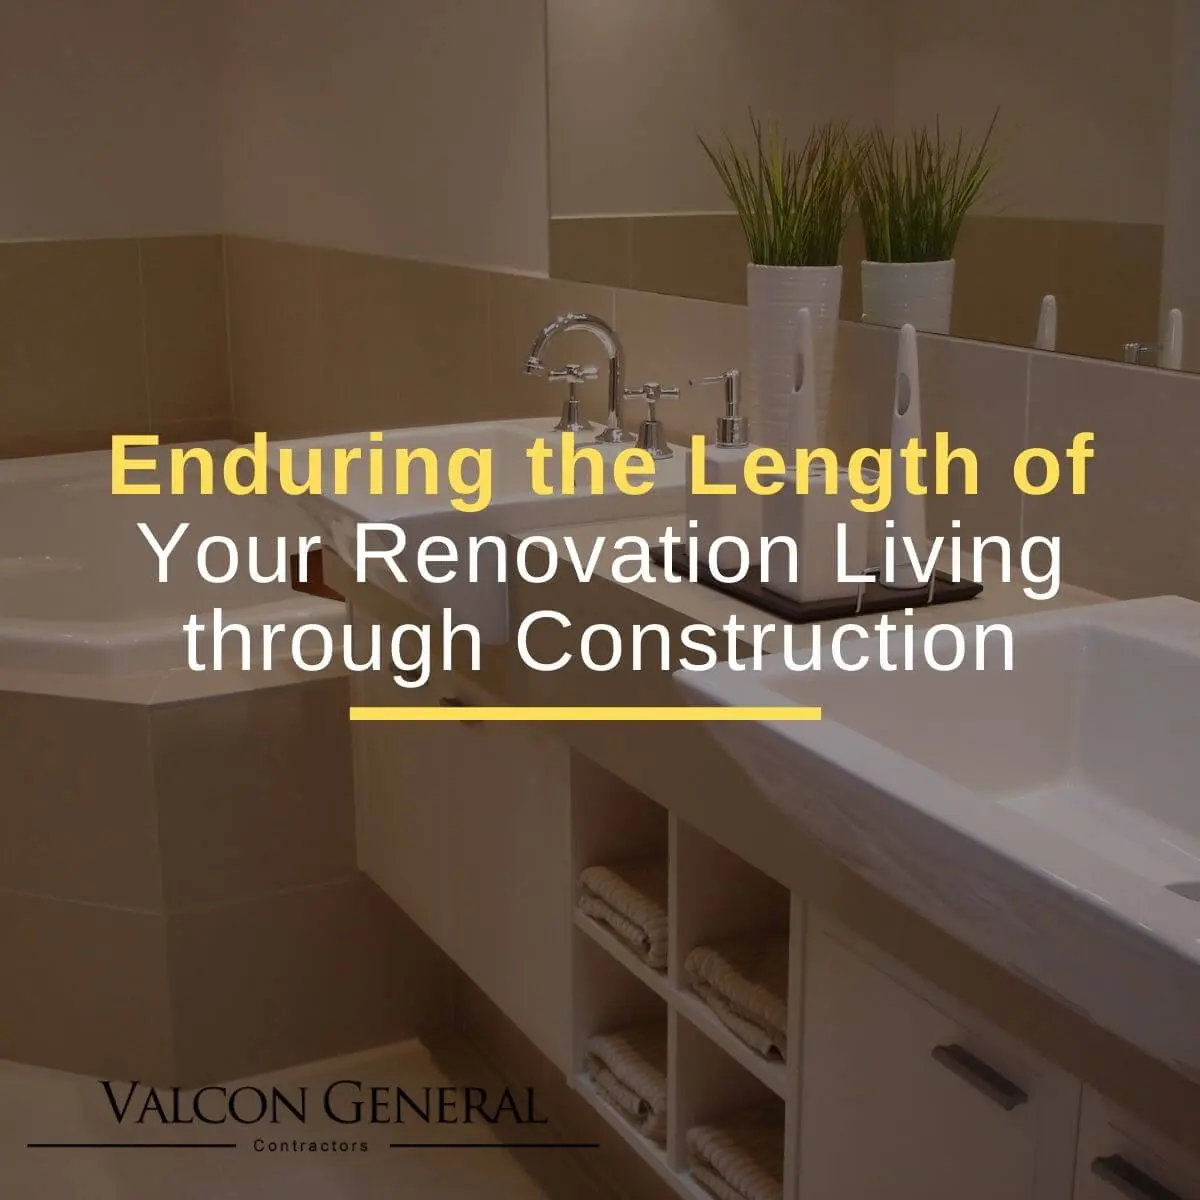 Enduring the Length of Your Renovation Living through Construction